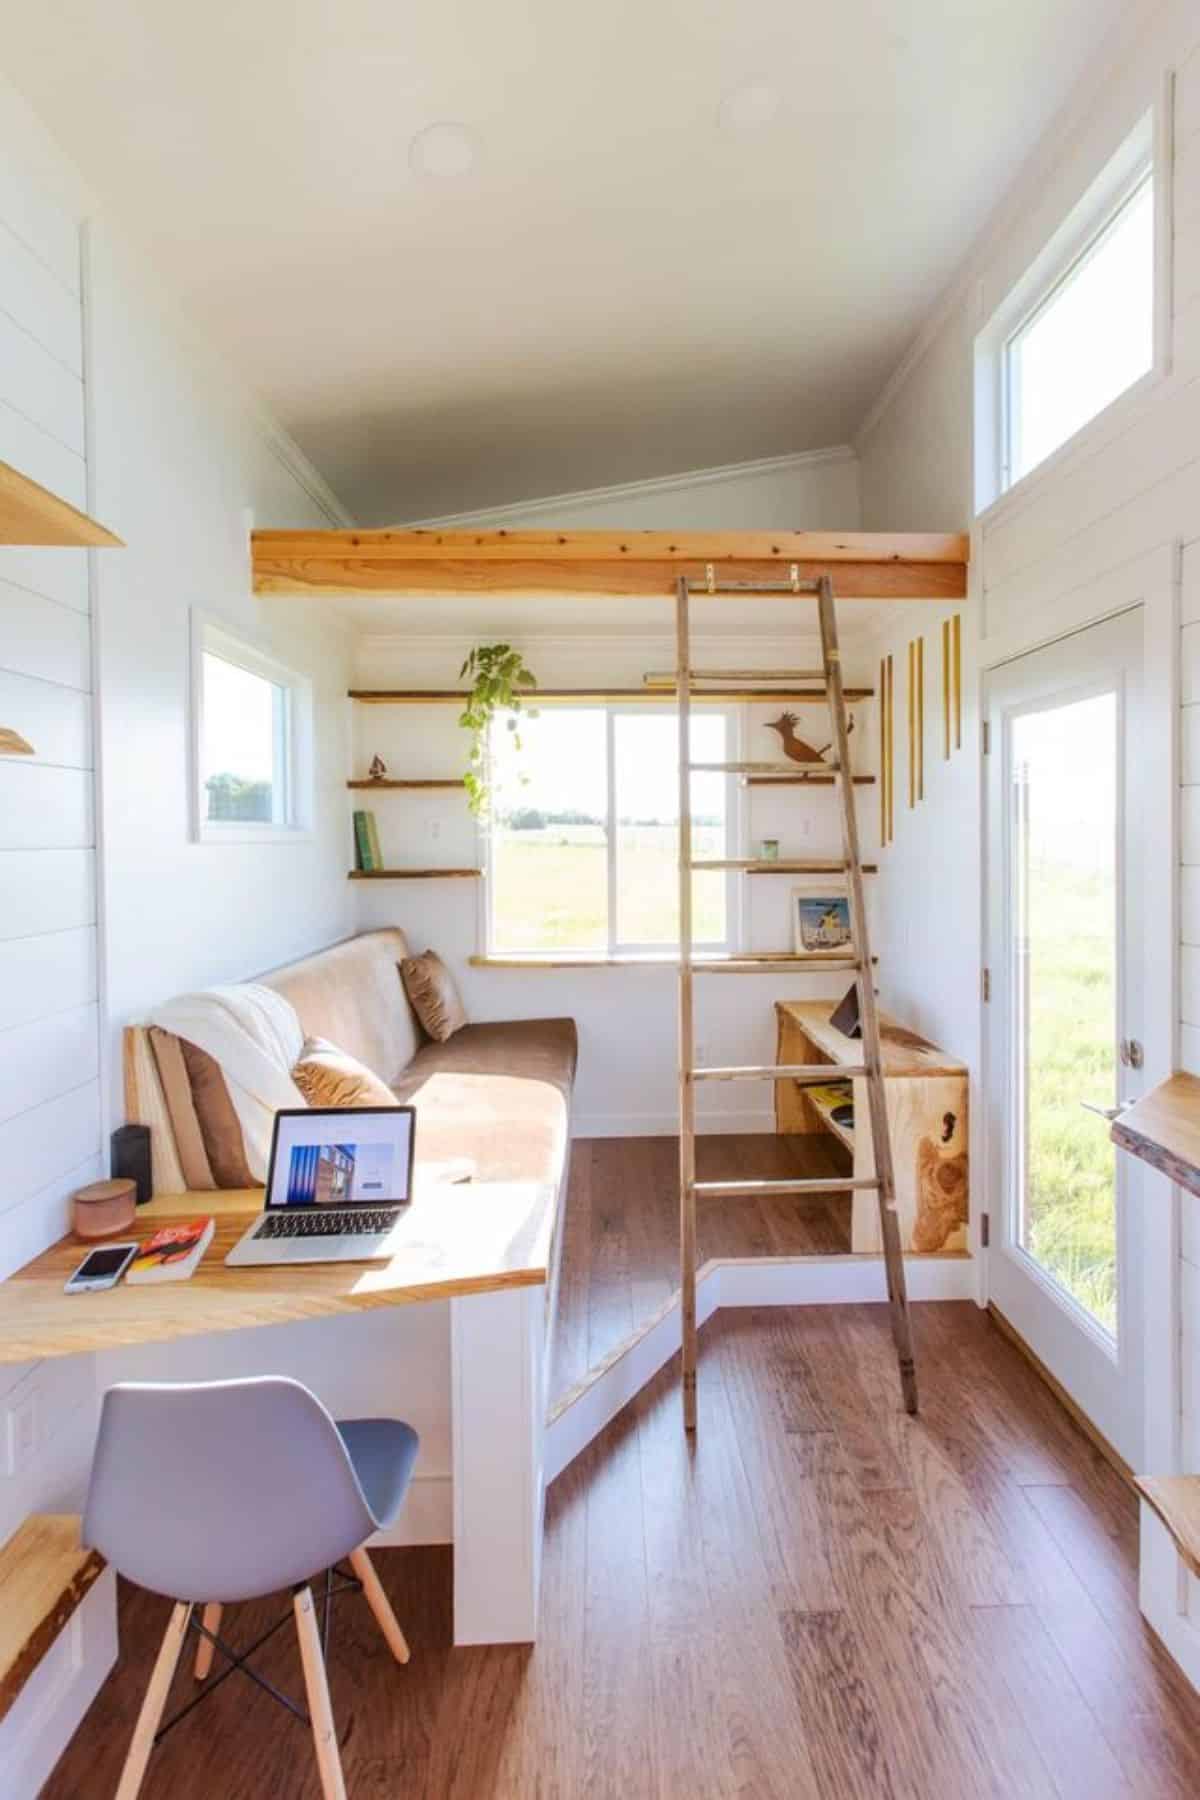 Work desk with chair and loft above the living area of one bedroom tiny home